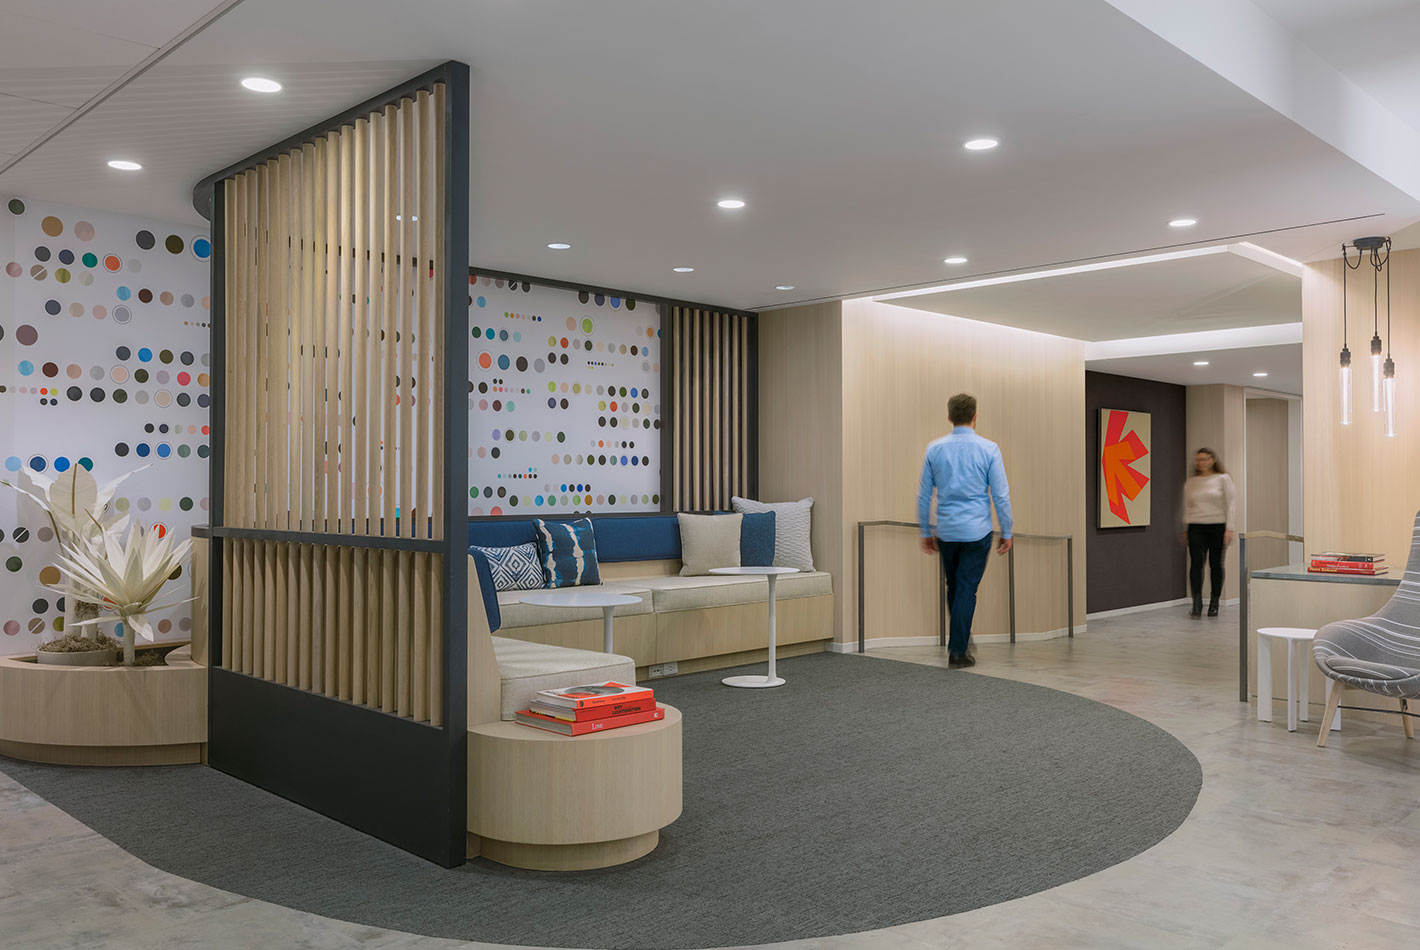 The reception area at J Crew's headquarters features bleached wood floors, white marble, and textural wall covering. A casual sofa area is also featured.